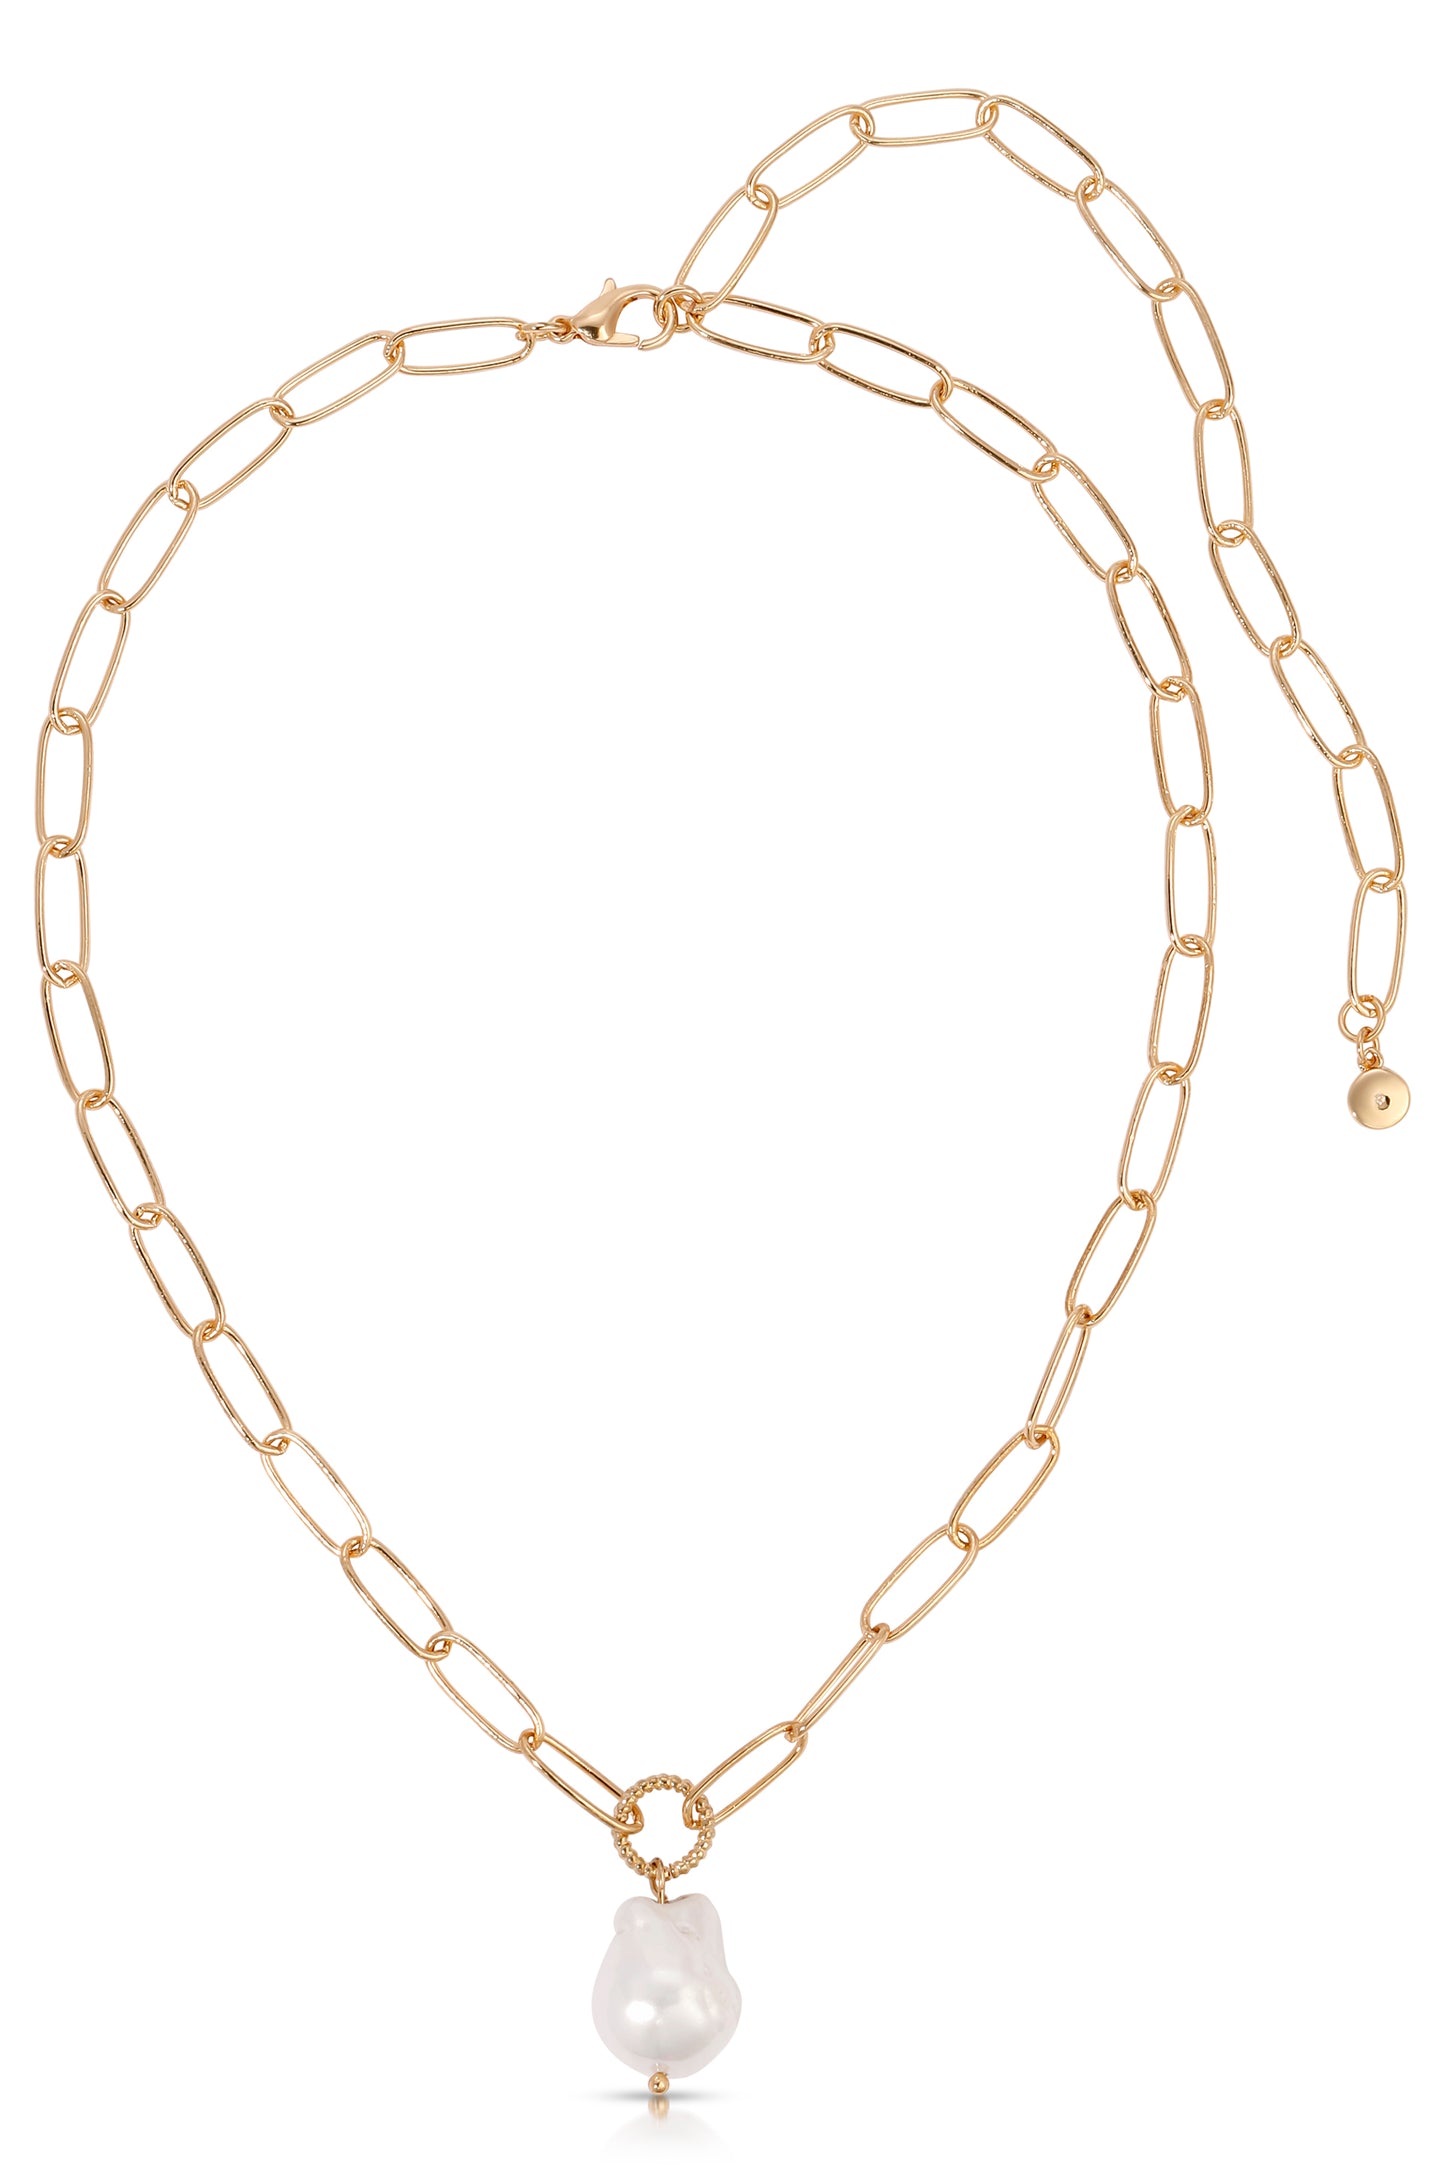 Single Pearl Open Links 18k Gold Plated Chain Necklace